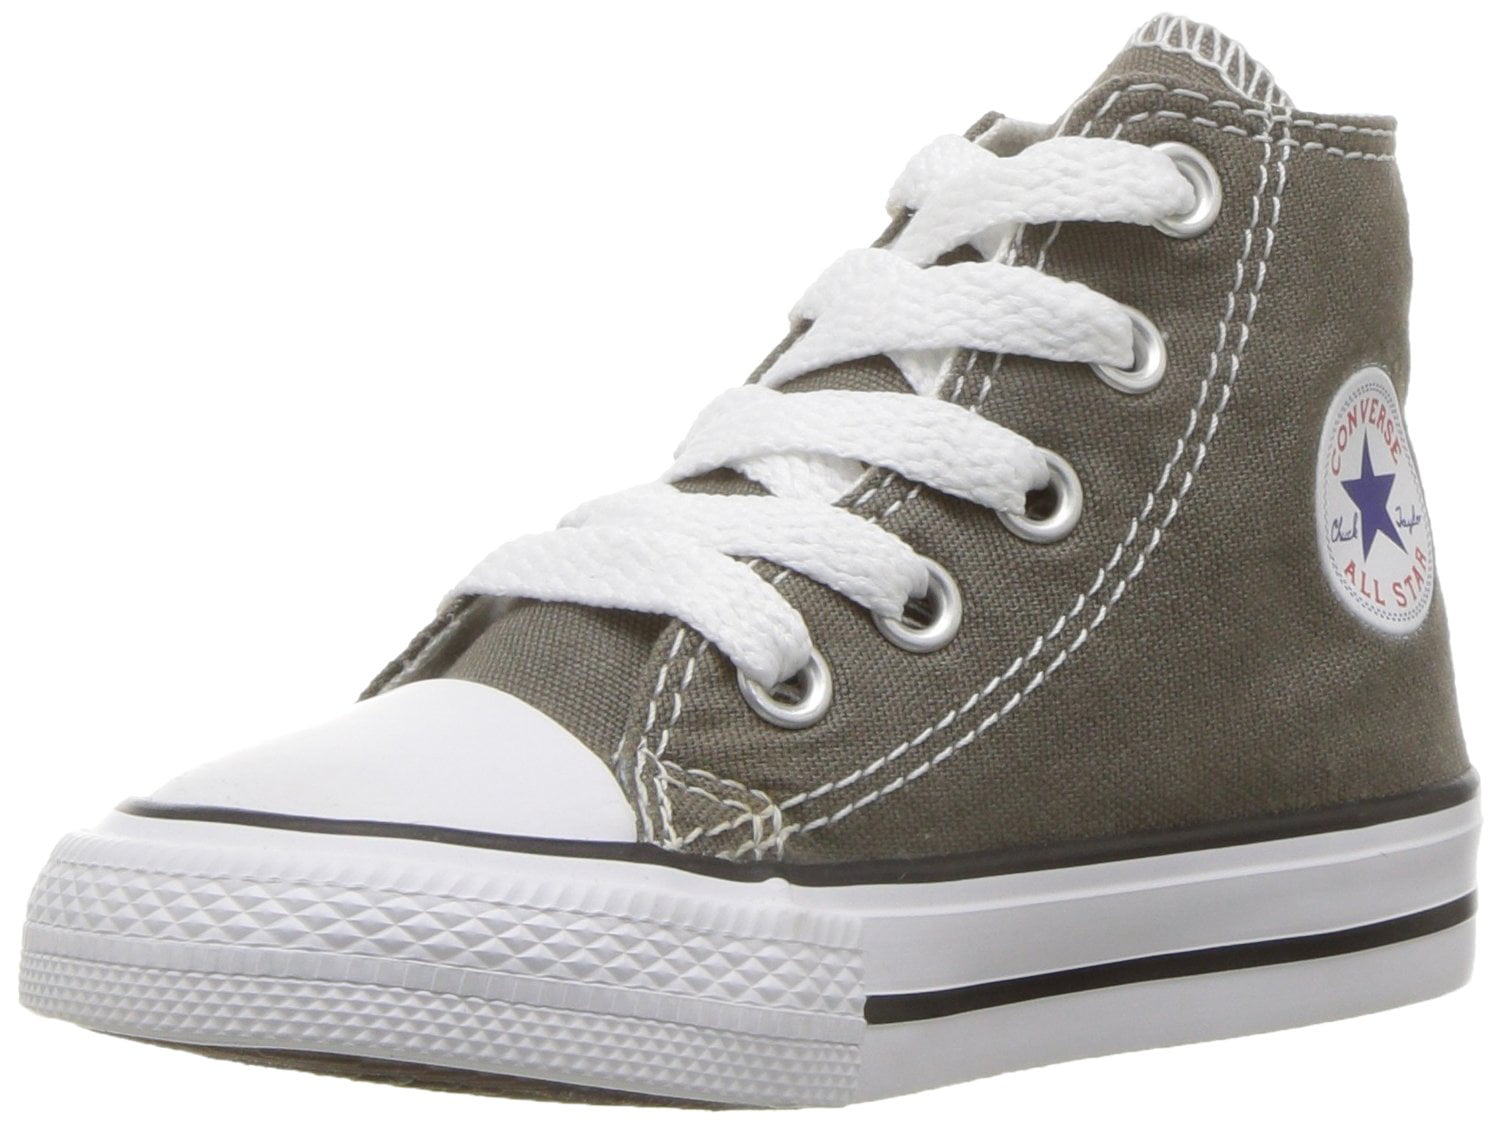 converse bianche limited edition xbox 360